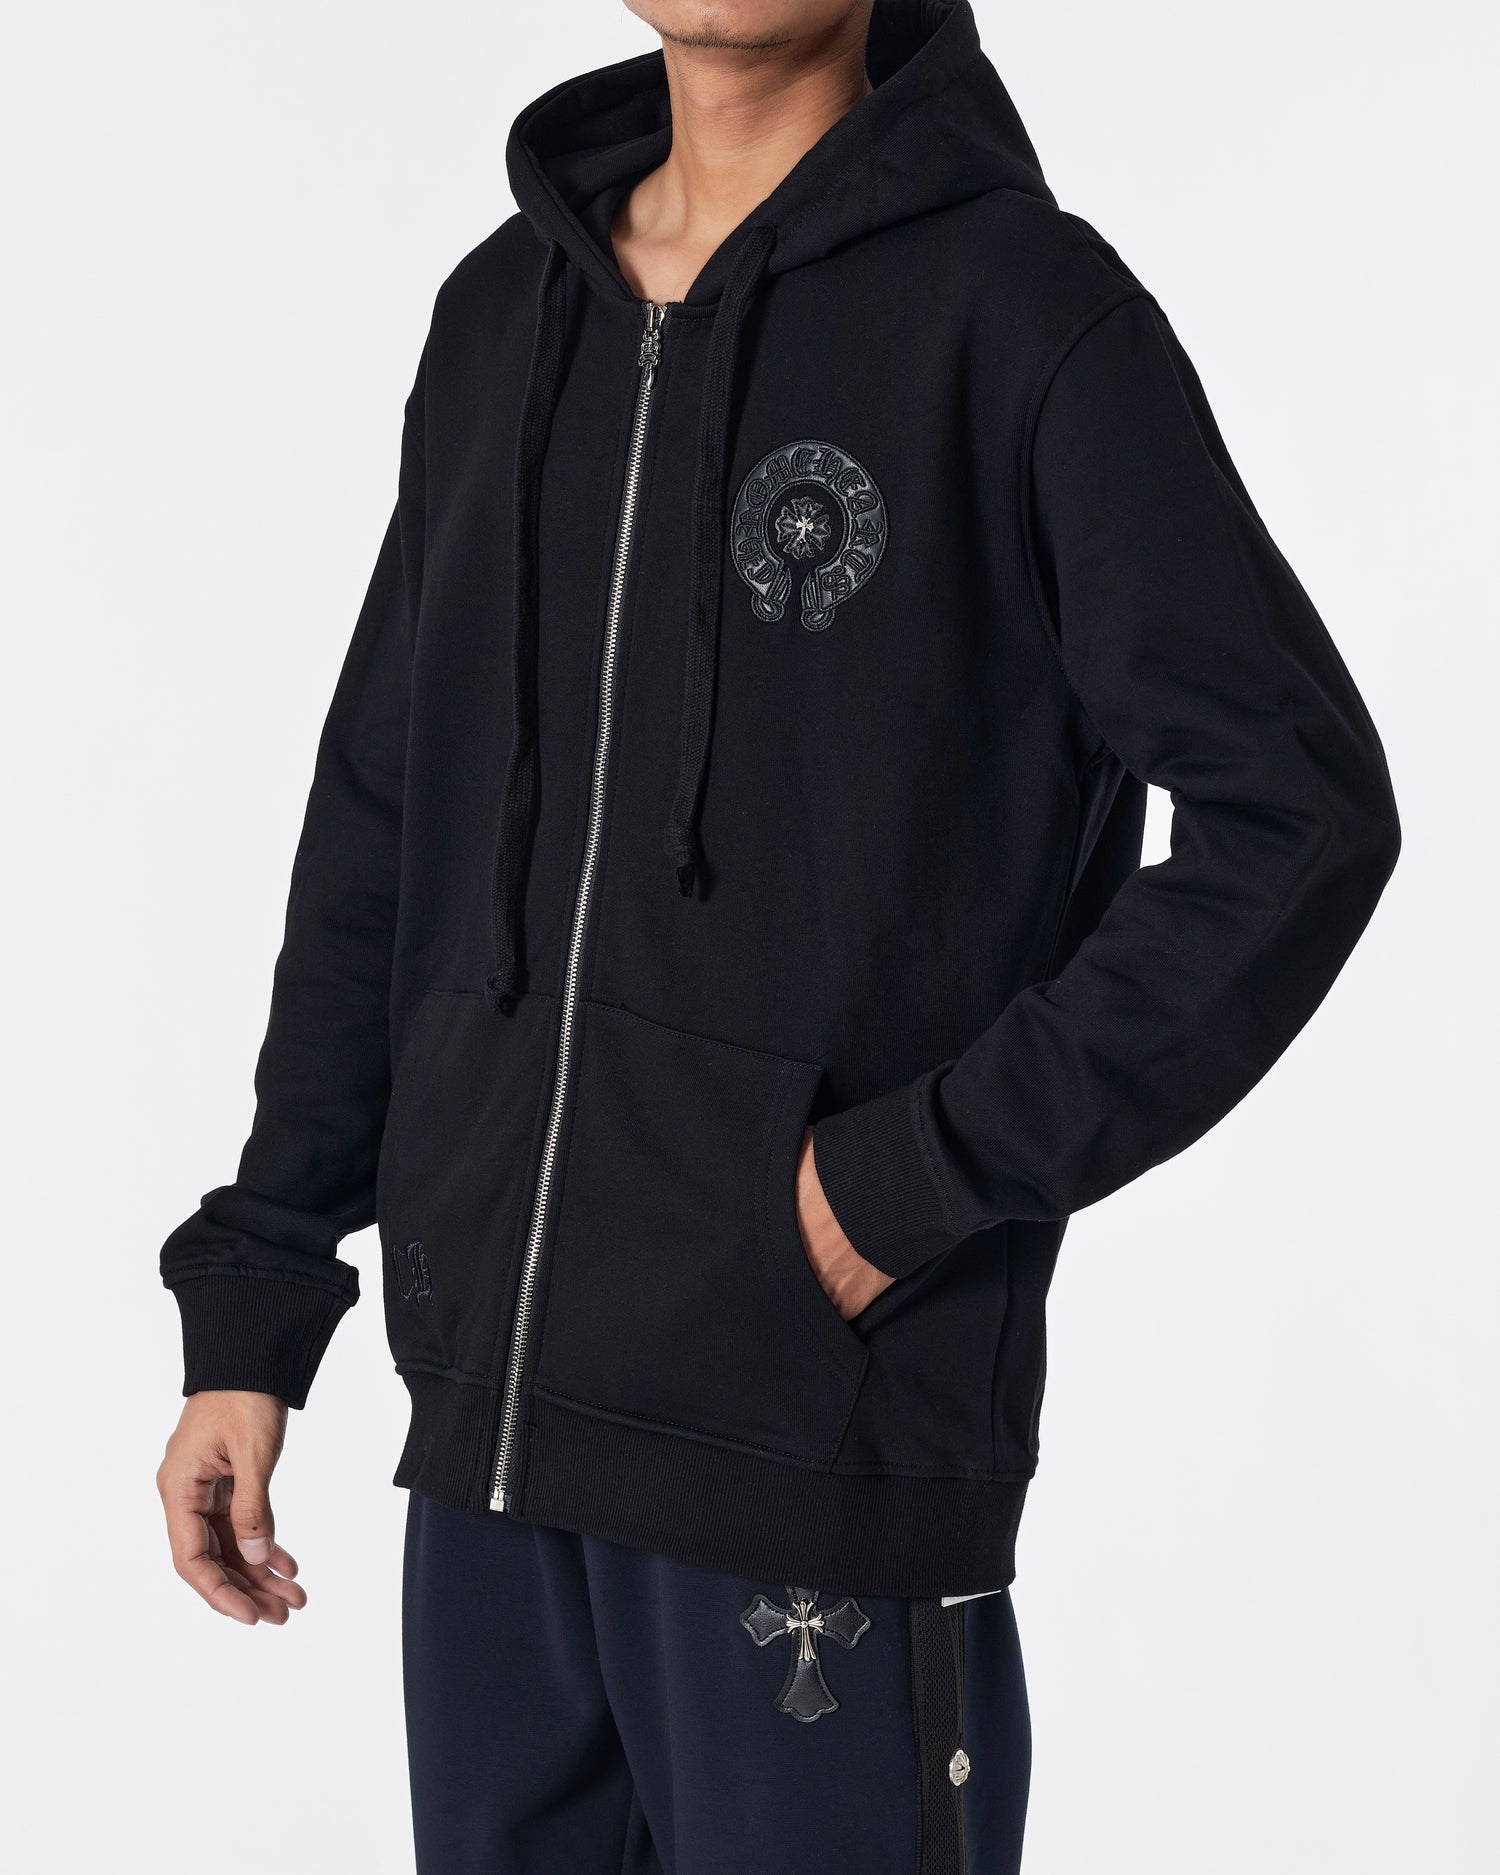 Cross Back Logo Embroidered Men Hoodie Zipped 44.90